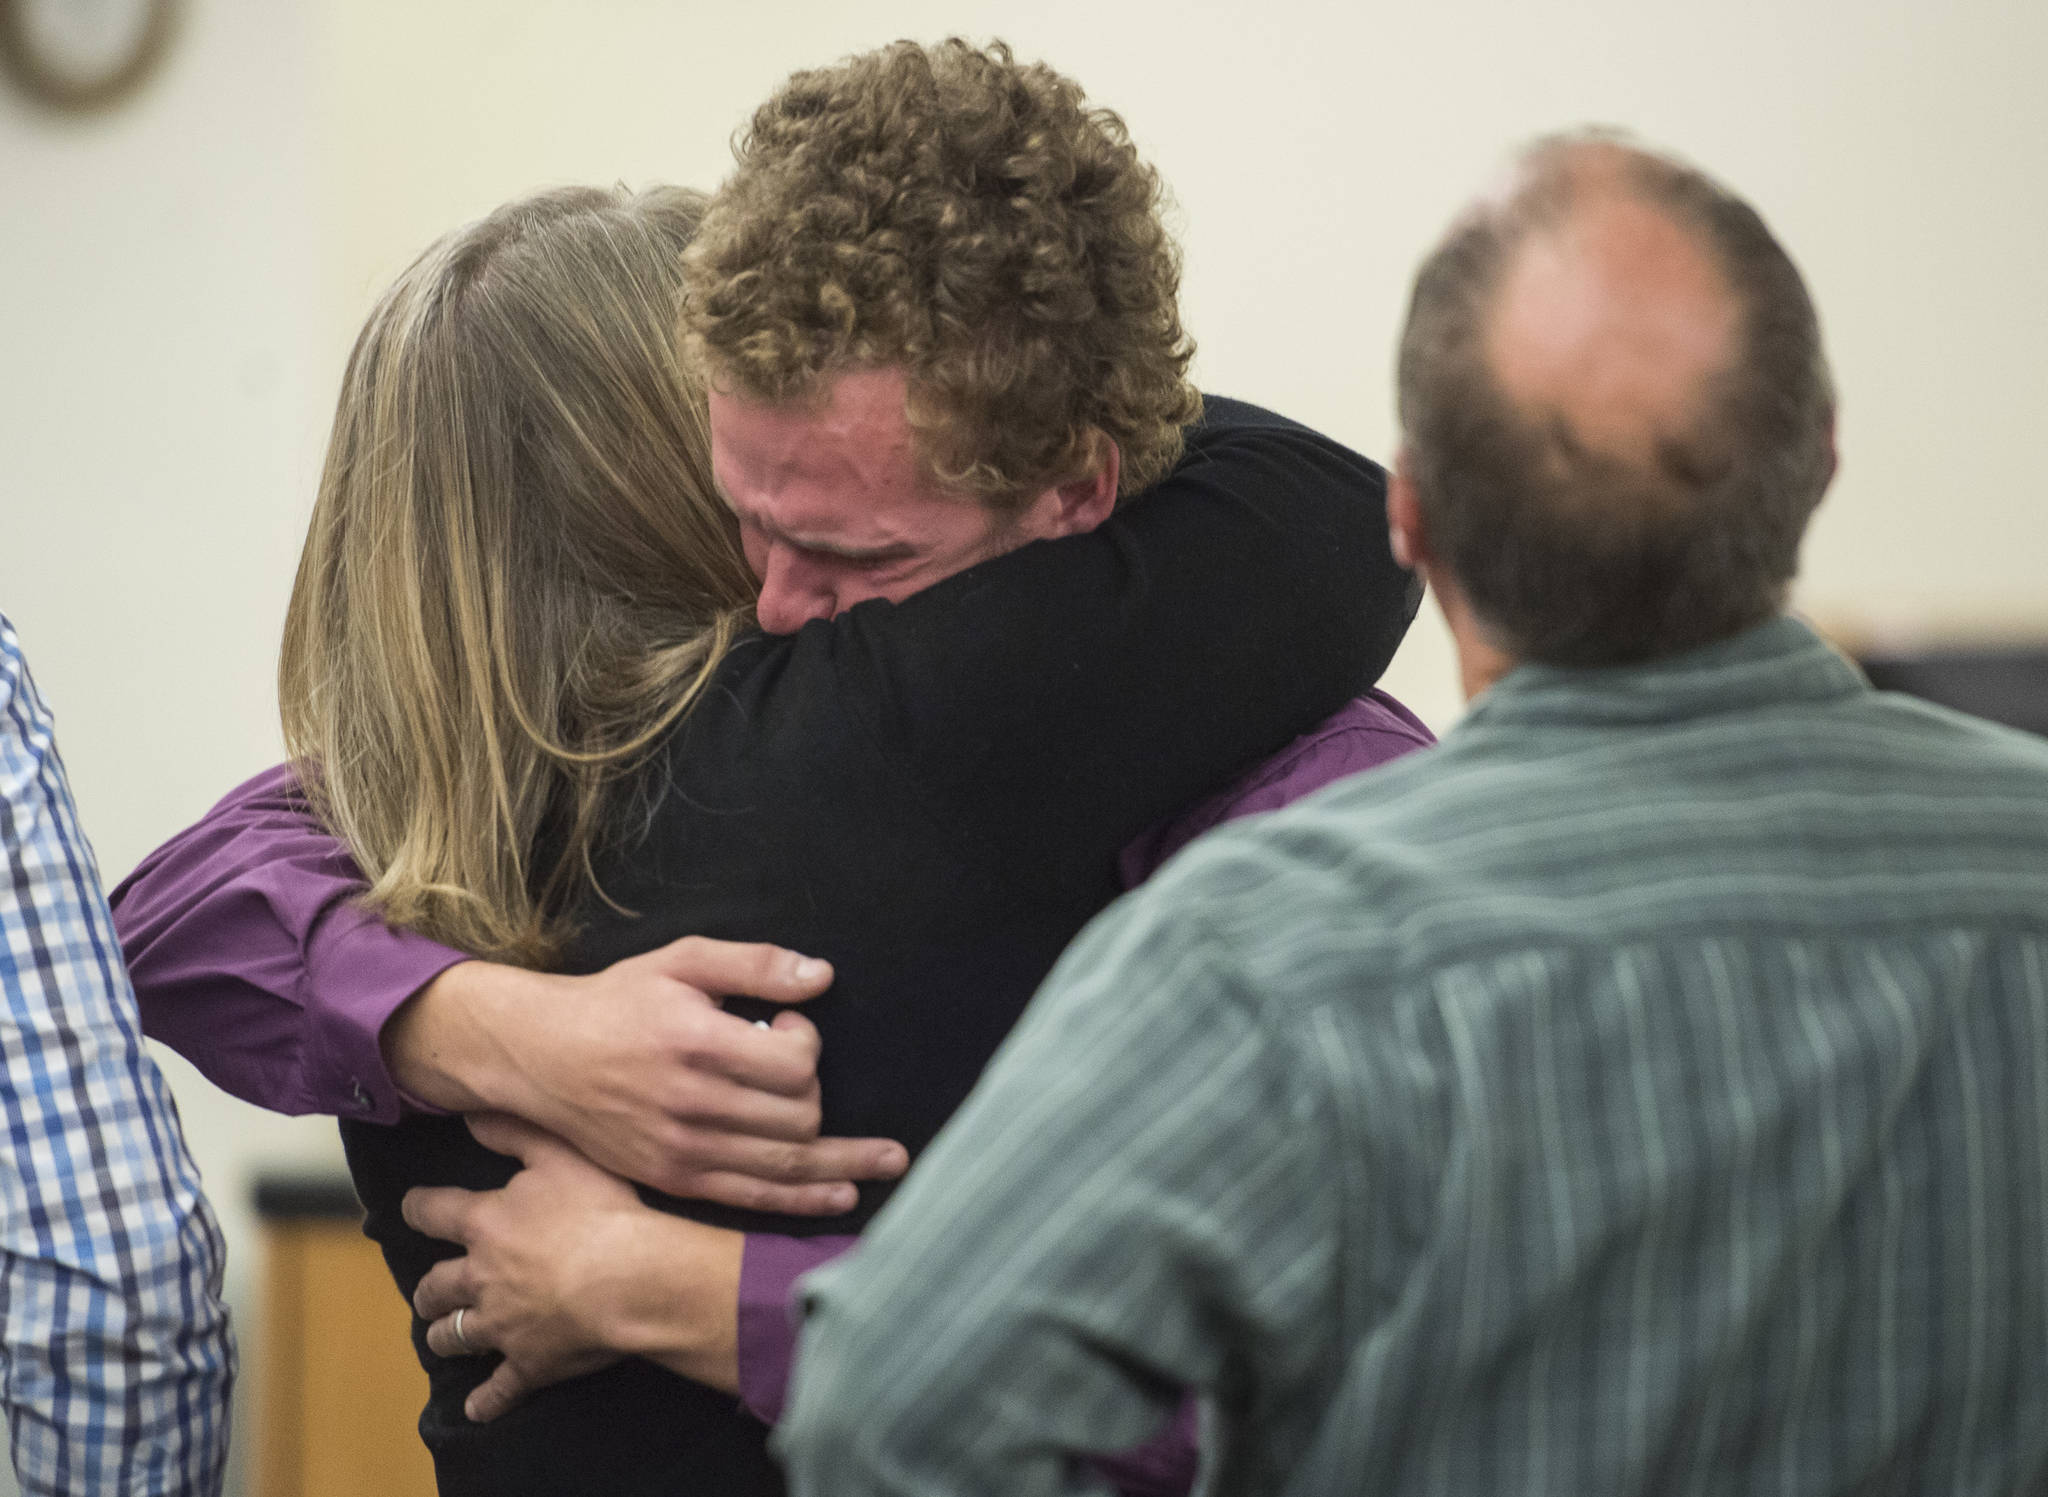 Ty Grussendorf, 24, center, hugs his parents after pleading guilty to two counts of sexual abuse of a minor in Juneau Superior Court on Monday, Oct. 22, 2018. (Michael Penn | Juneau Empire File)